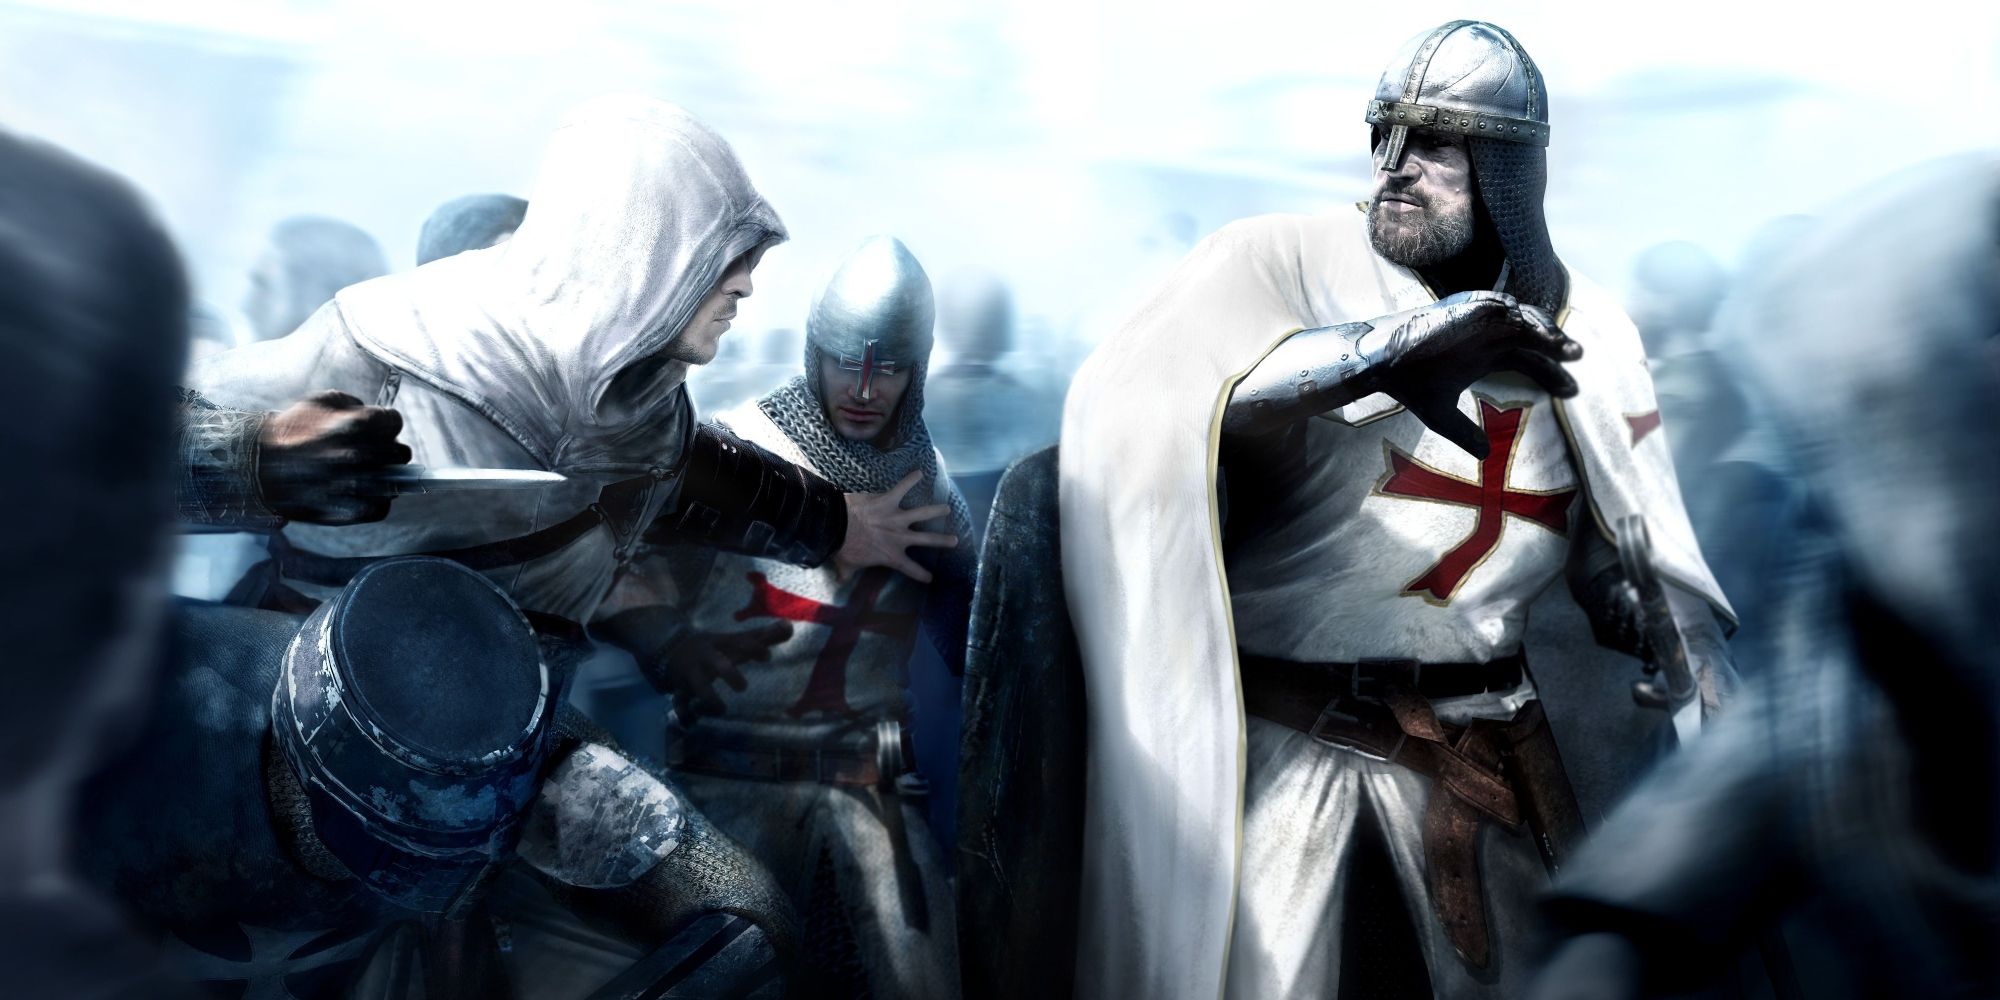 Master Assassin Altaïr made modifications to the Hidden Blade with the Apple of Eden